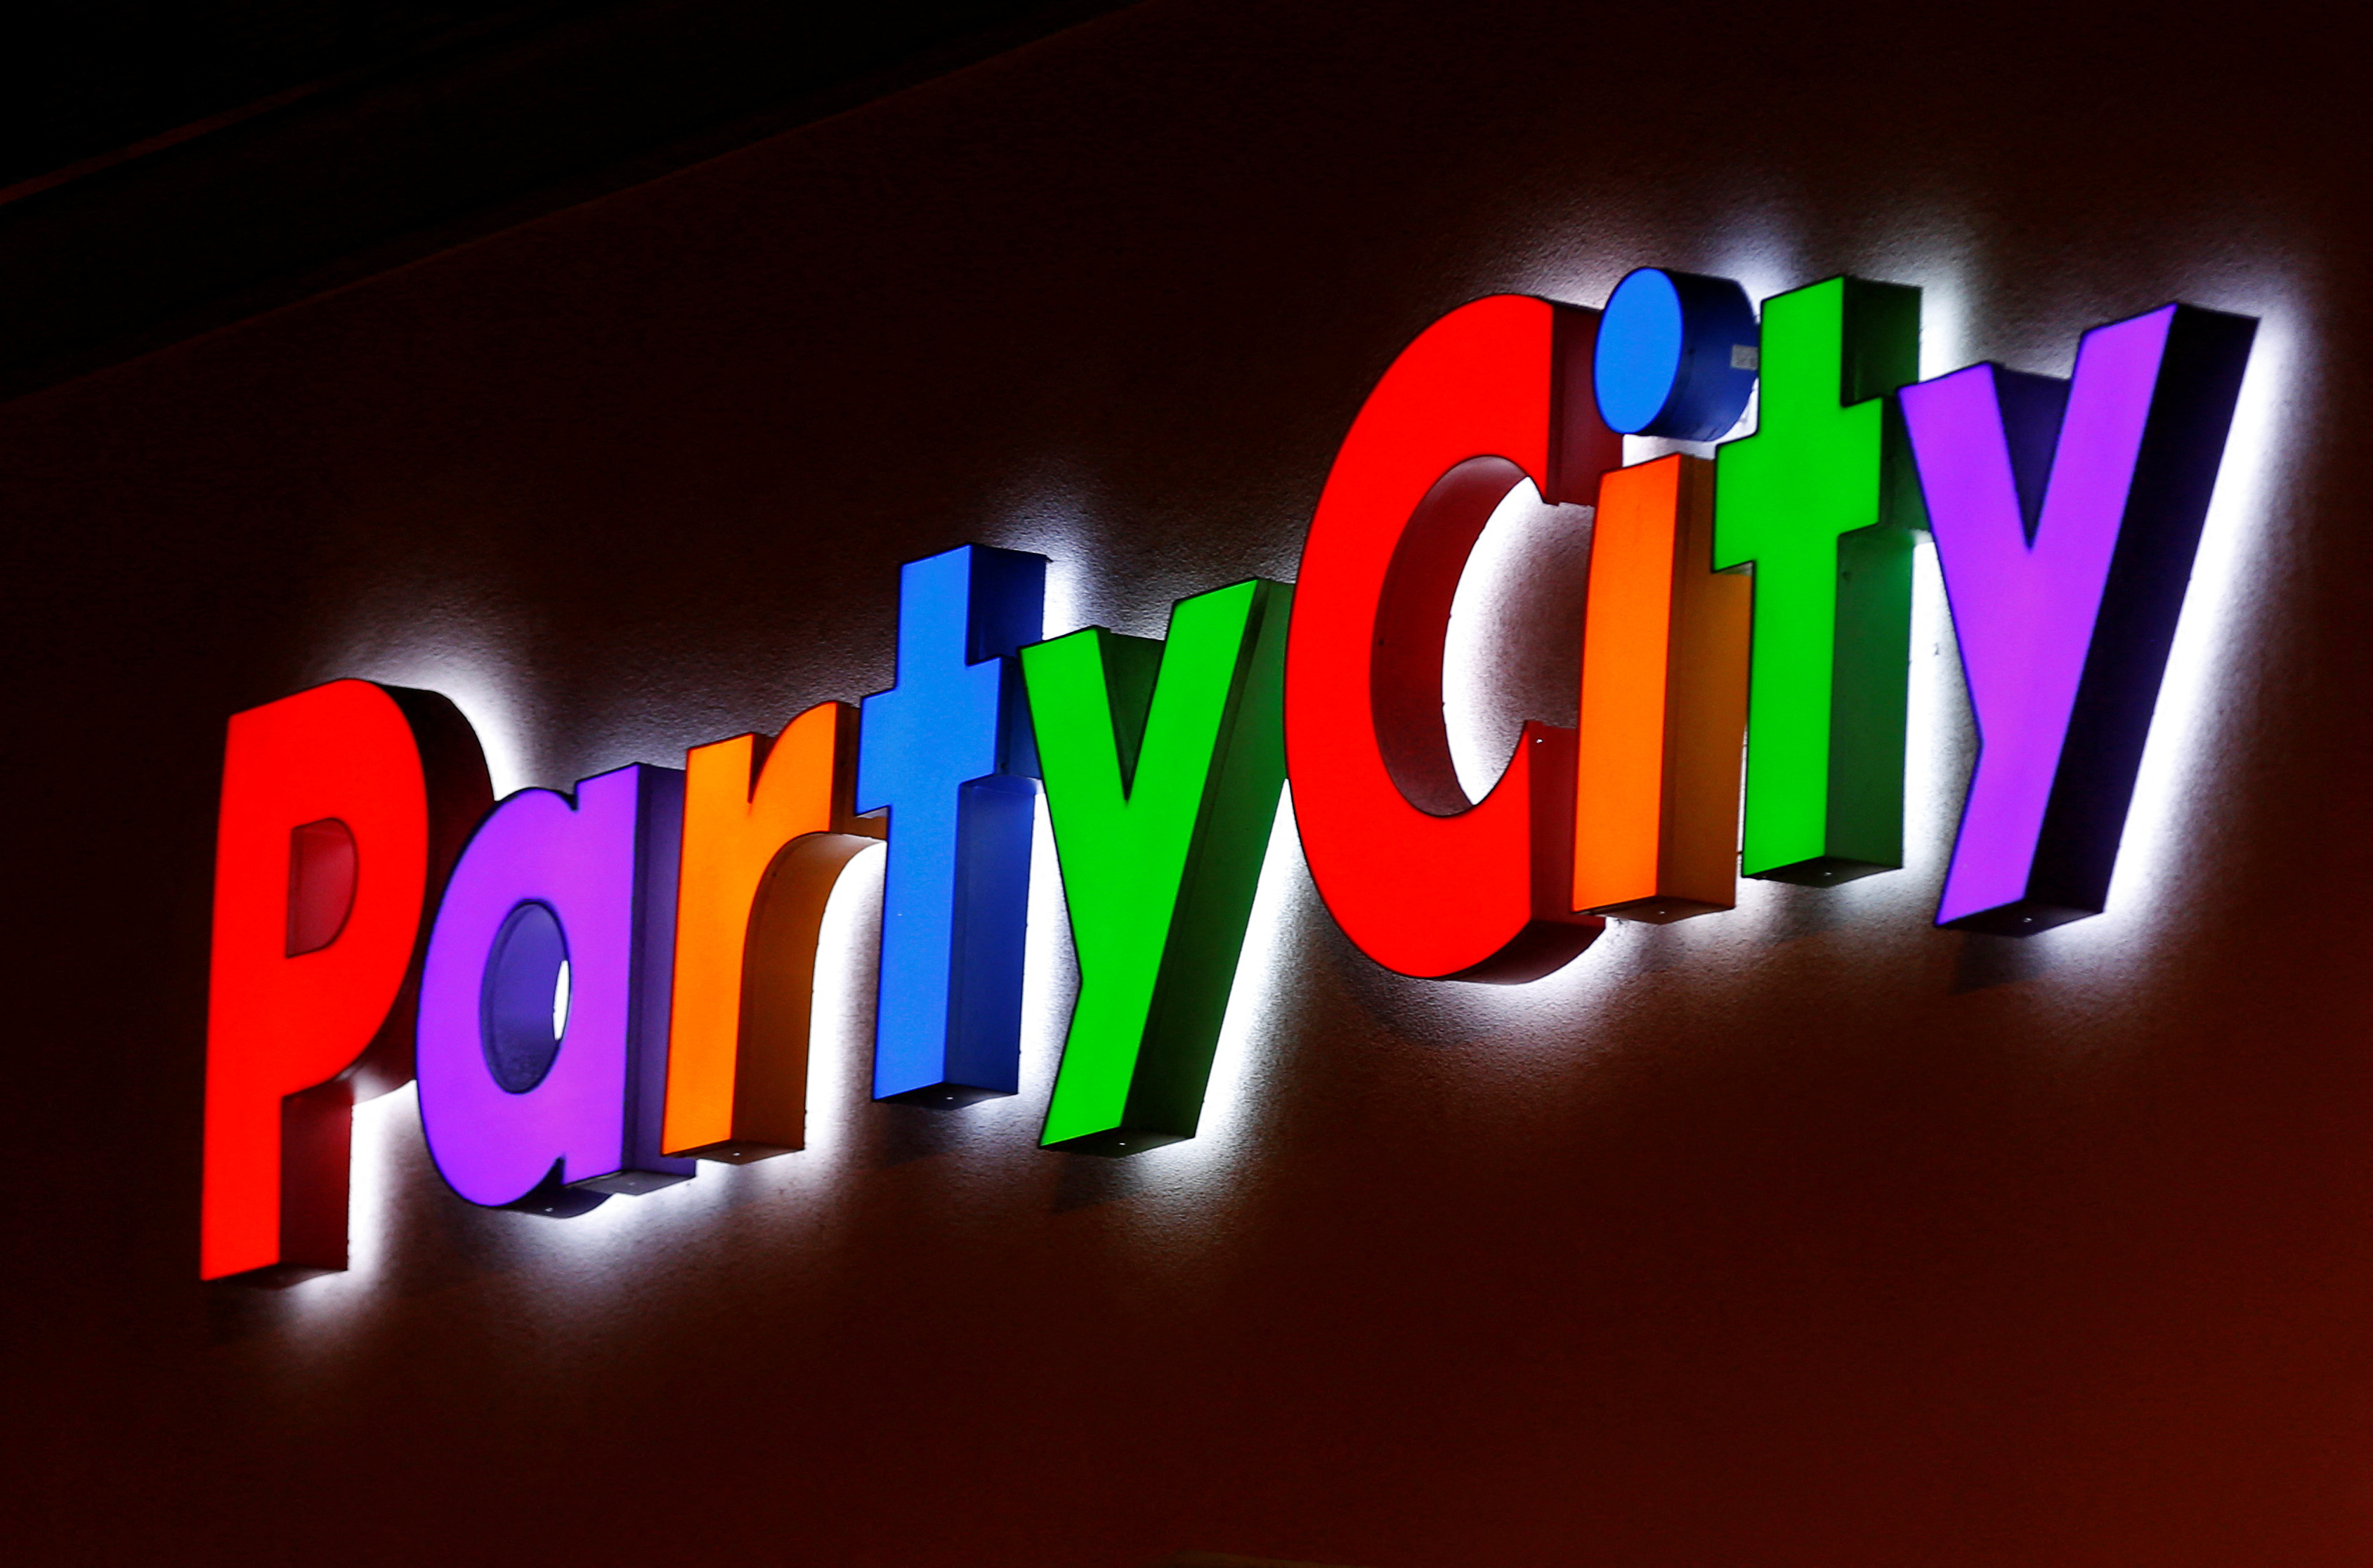 A Party City store sign in seen in Encinitas, California